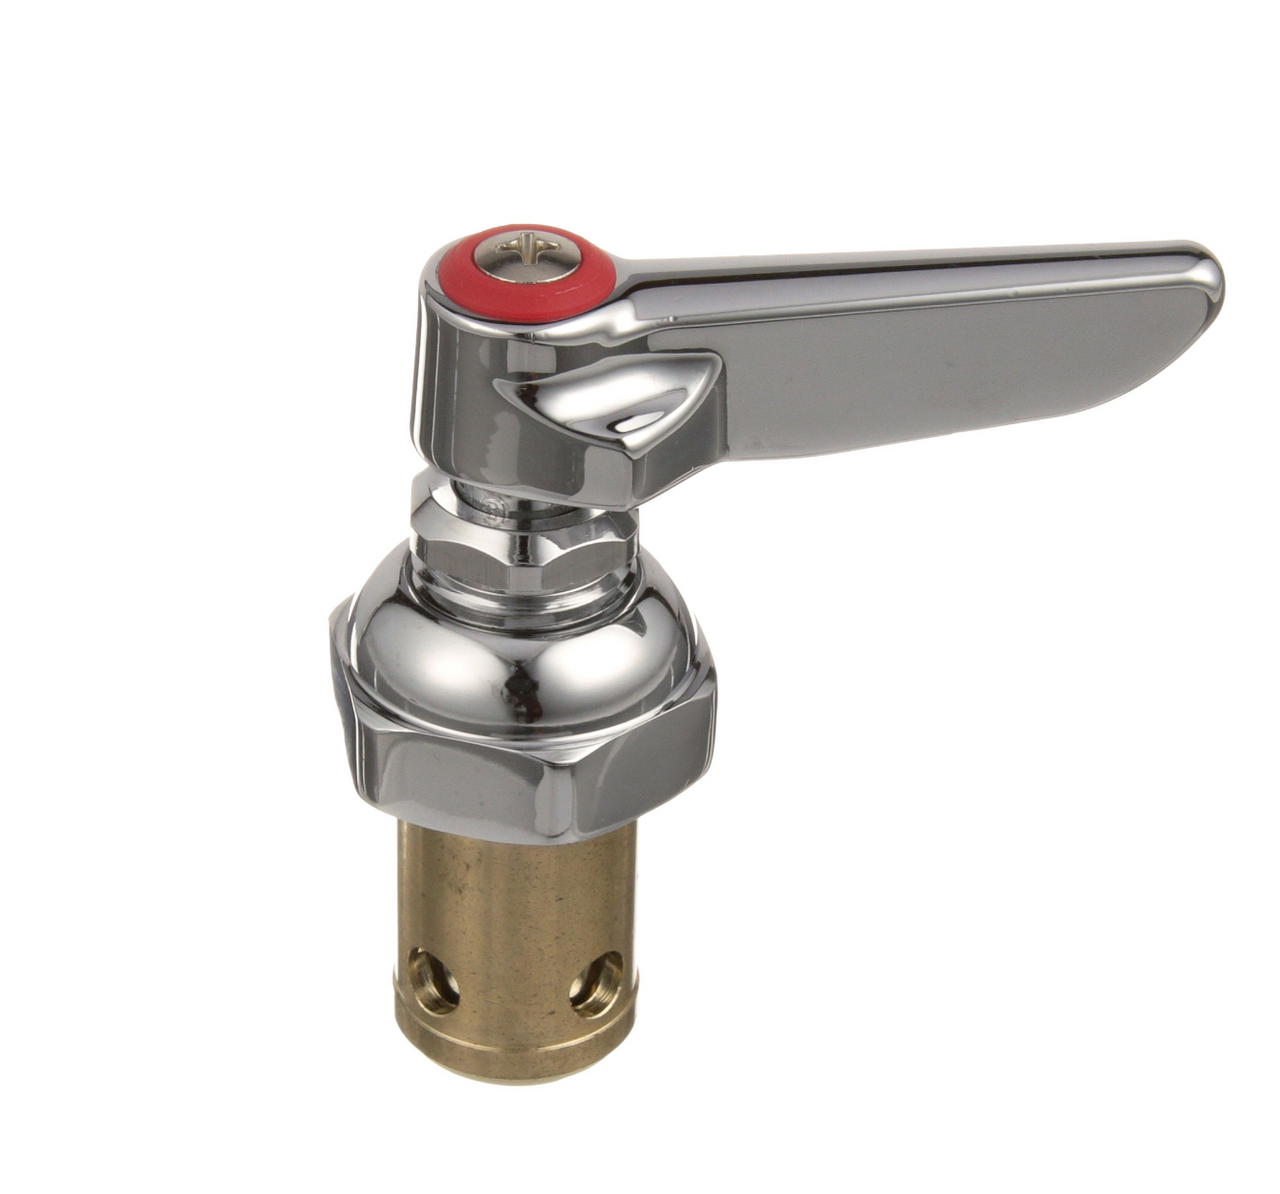 Buy| Shop | This 2714-40 spindle assembly comes complete with Eterna cartridge, lever handle, red index and screw. This complete assembly allows for easy and complete